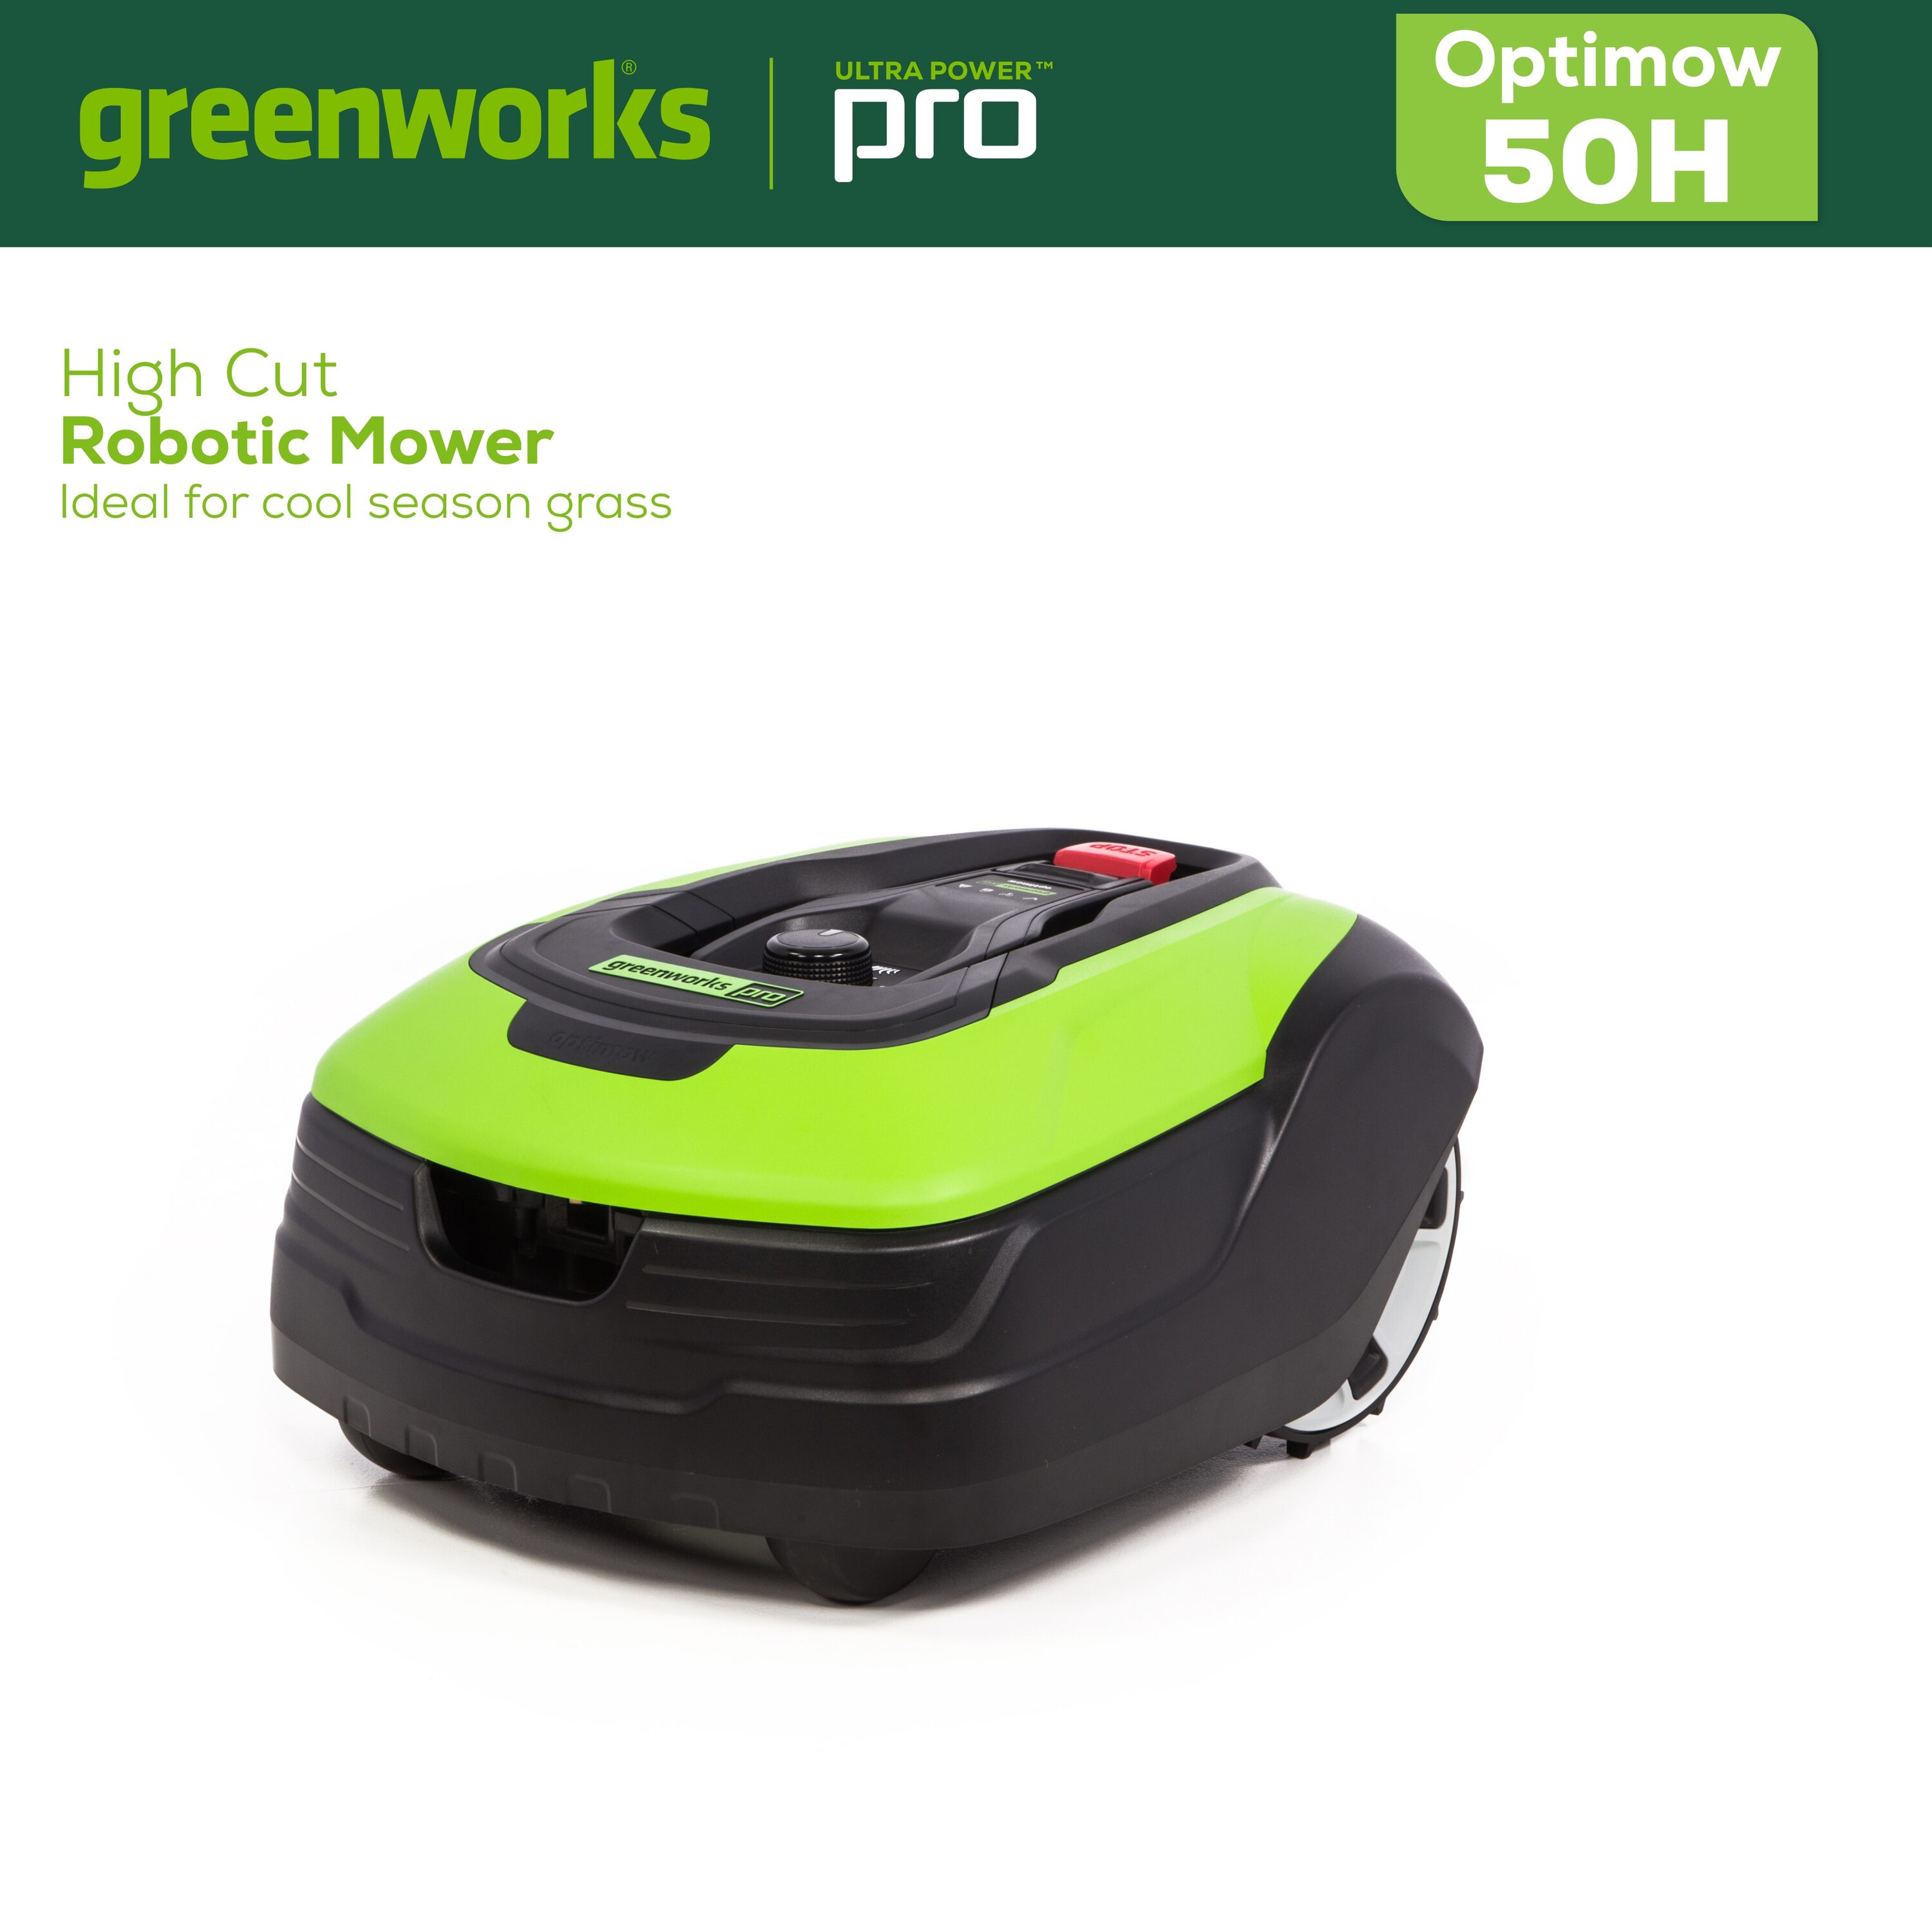 Greenworks OPTIMOW 50H